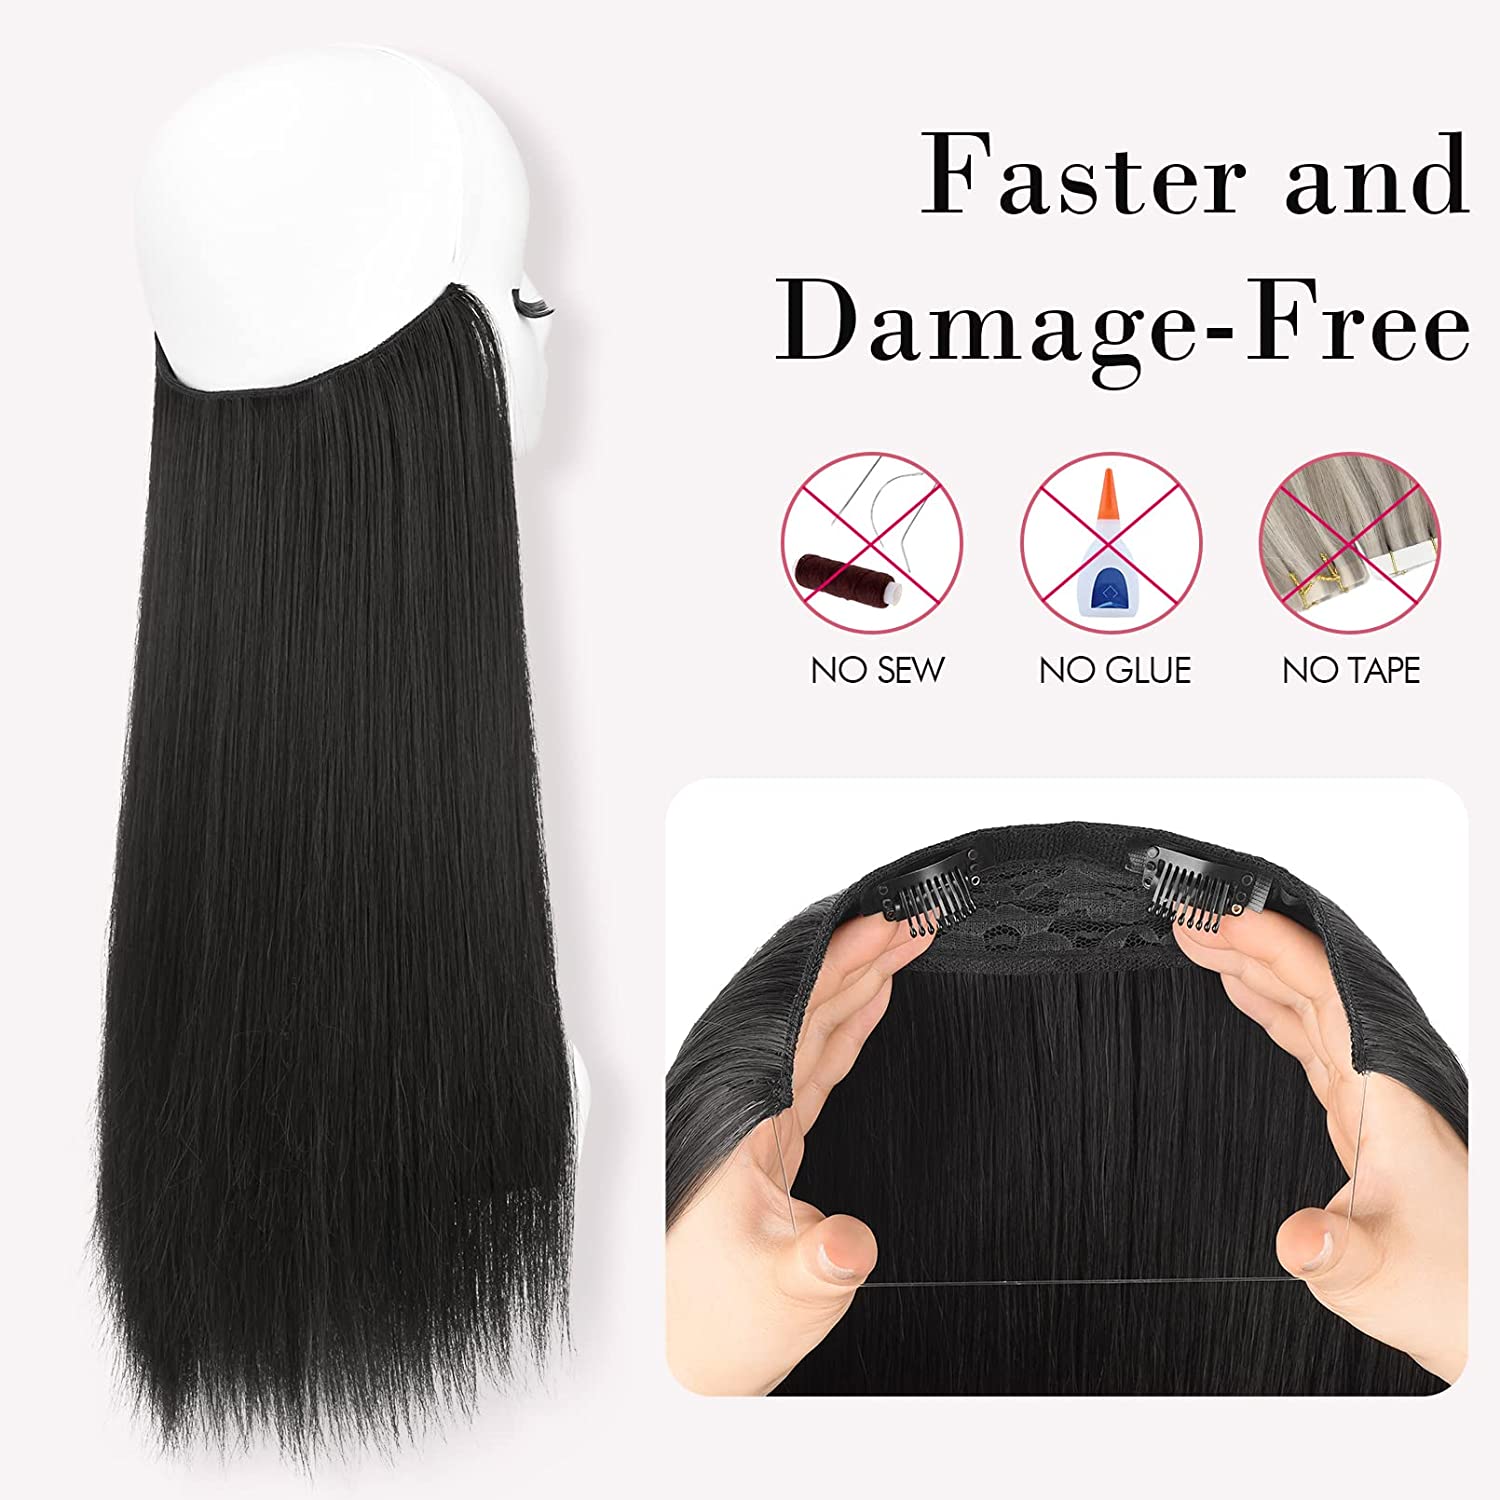 REECHO Invisible Wire Hair Extensions, Removable Secure Clips in Hair Extensions with Invisible Transparent Wire Adjustable Size Secret Hairpiece for Women